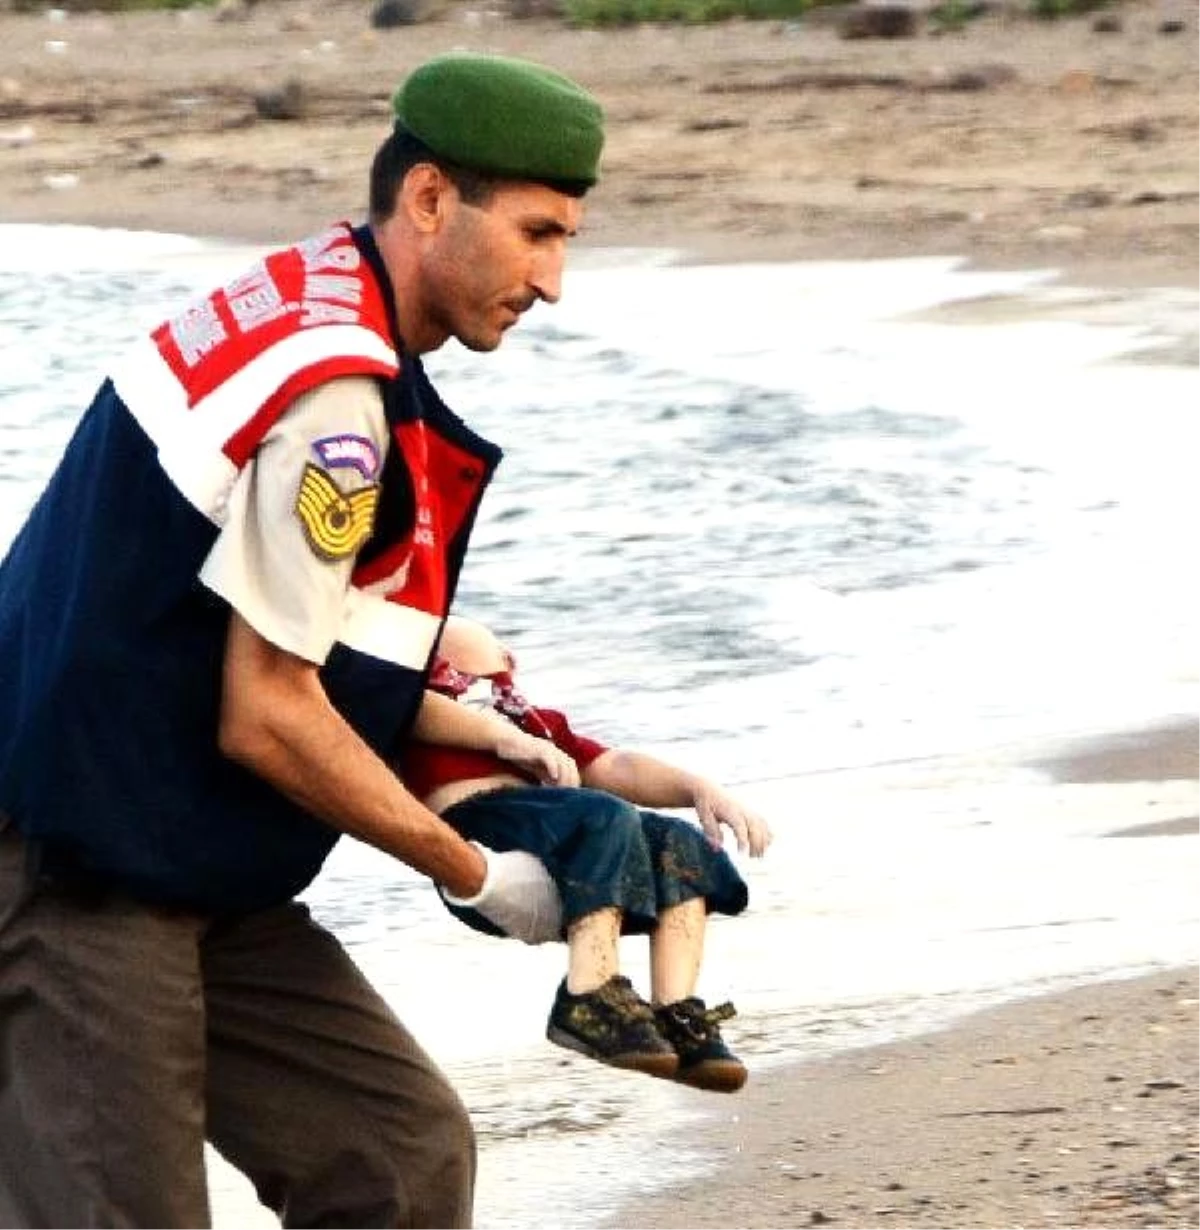 Photographer Of The World Shaking Picture Of Drowned Syrian Toddler: "I Was Petrified At That...